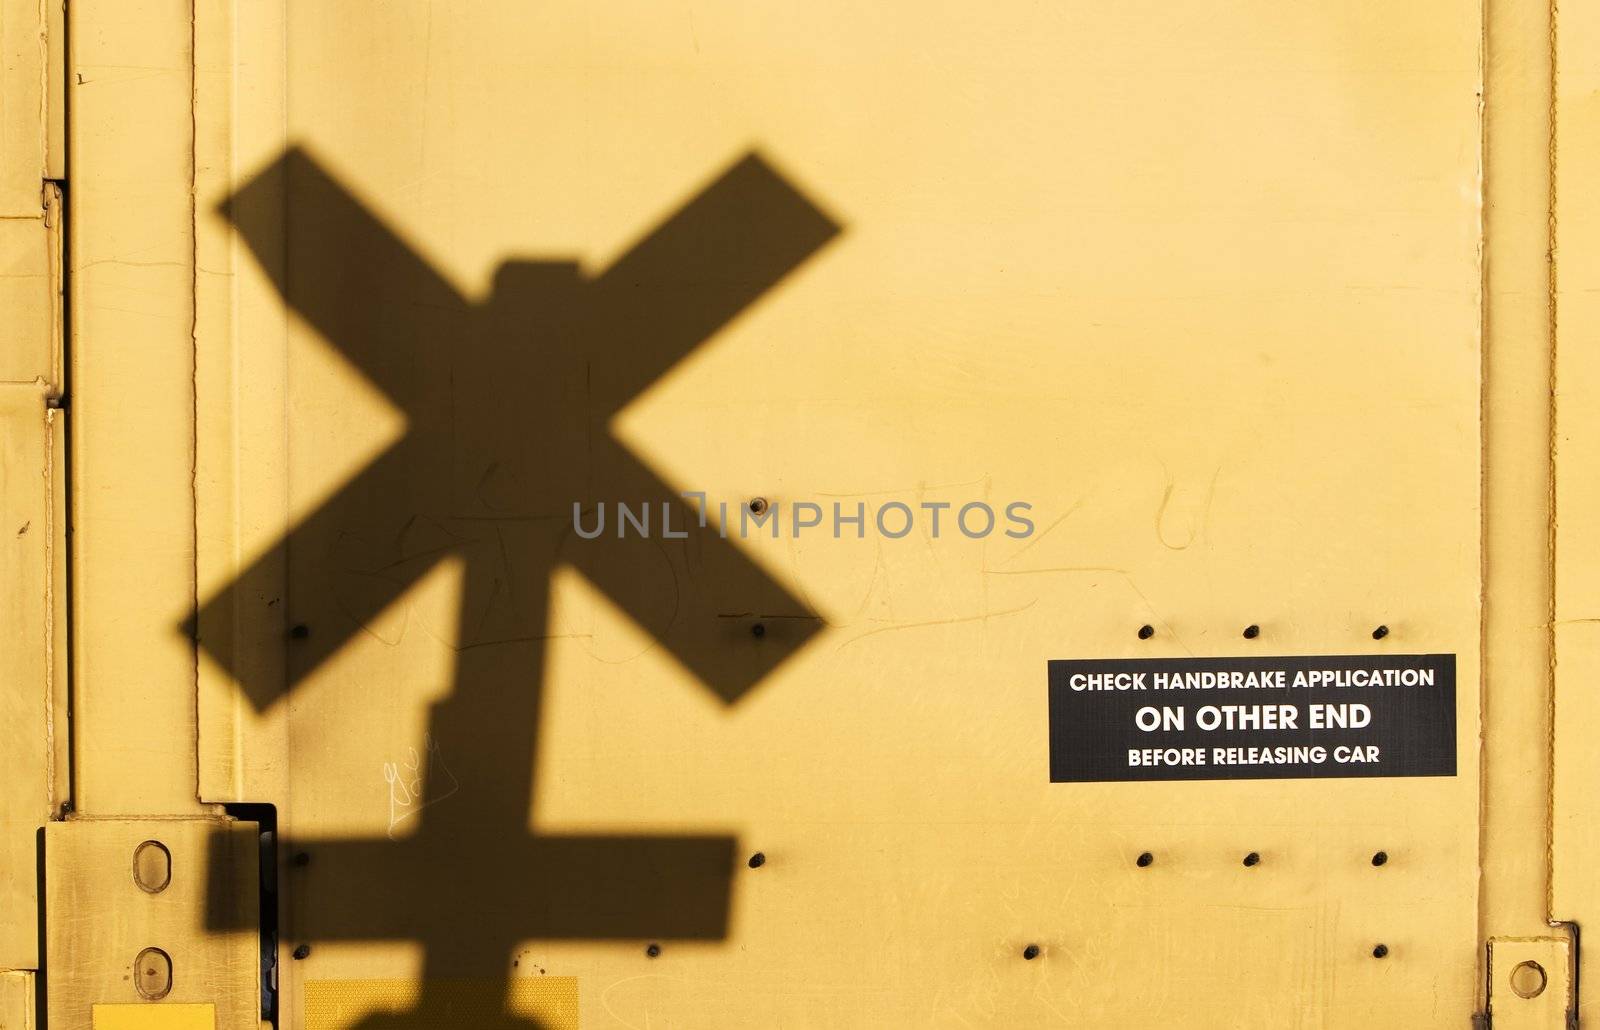 Shadow of a railroad crossing sign cast against the yellow side of a freight train car.